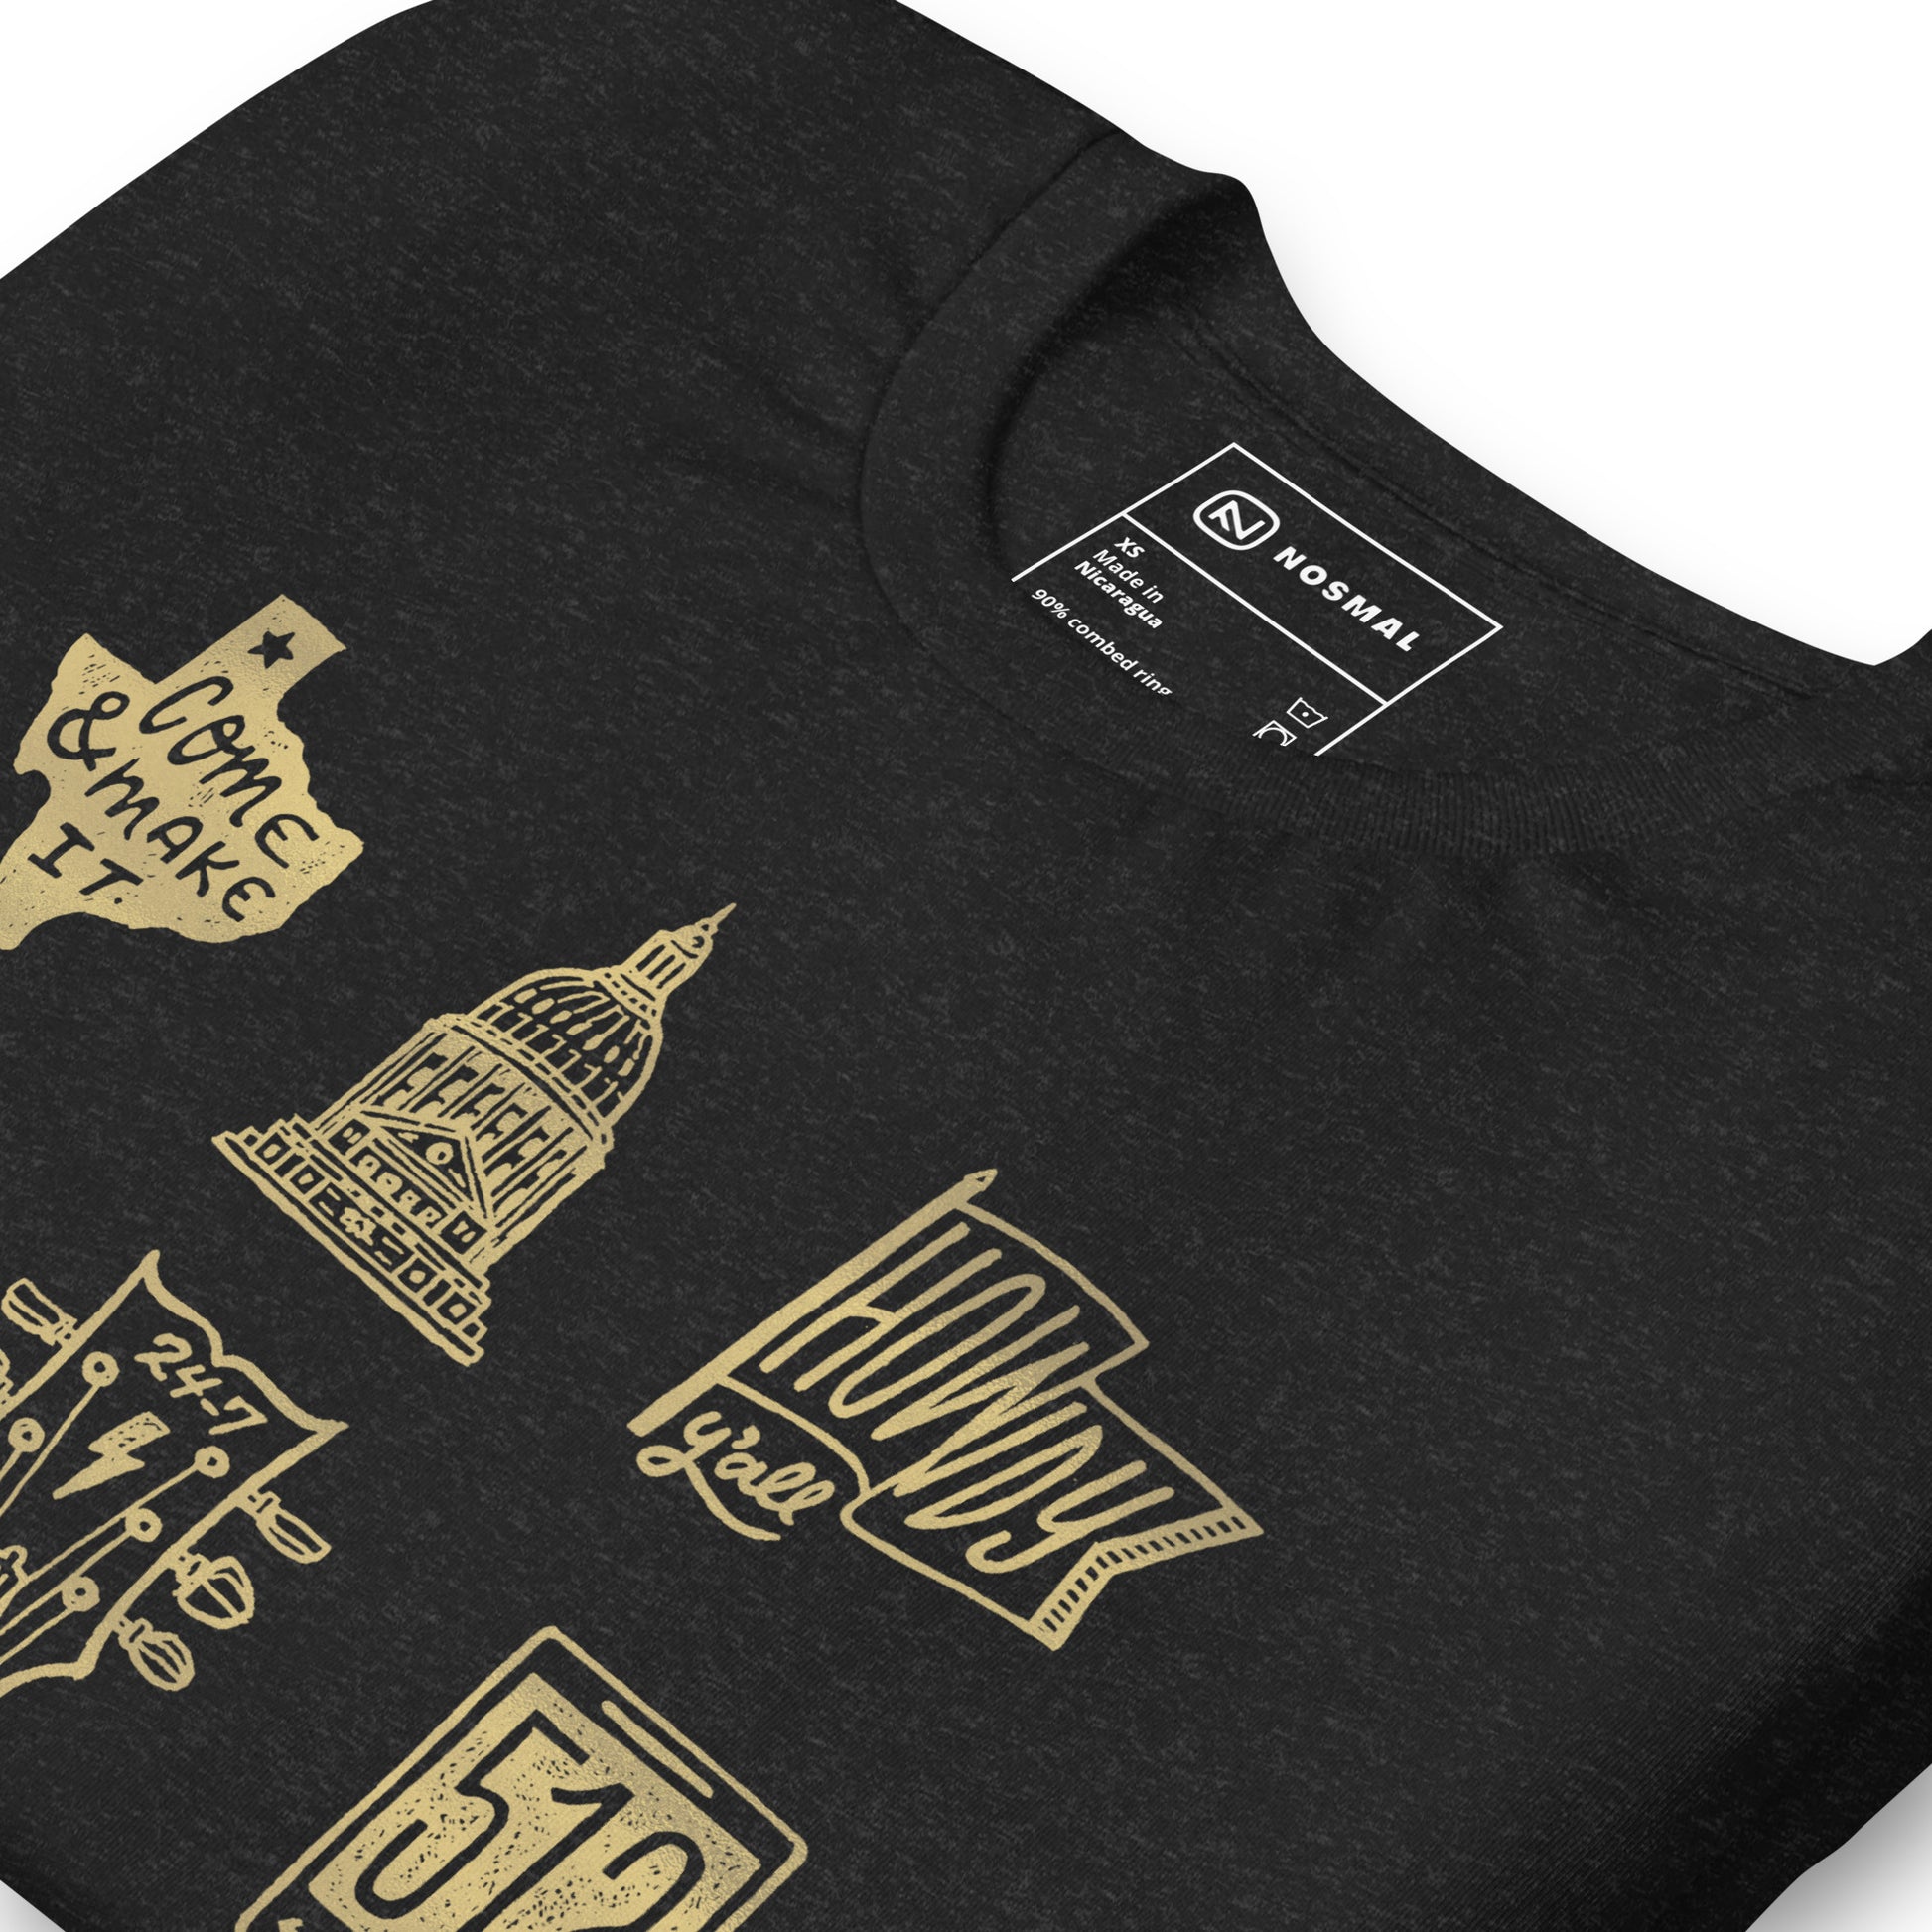 Angled close up shot of ode to 512 gold design on heather black unisex t-shirt.